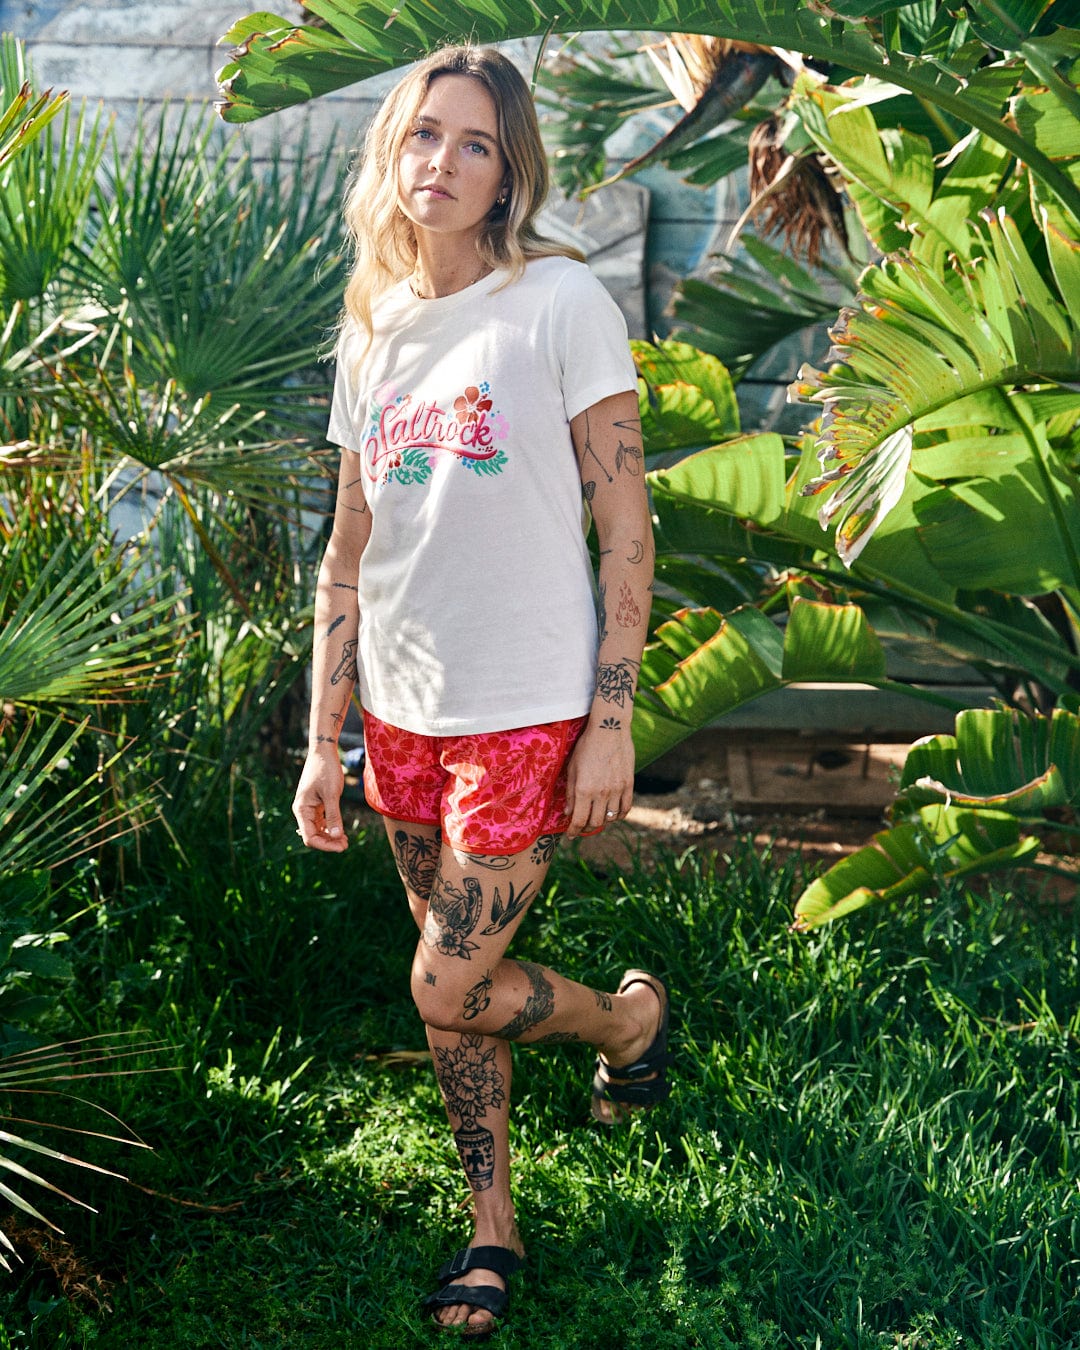 A woman with tattooed arms and legs stands in a garden, wearing a white t-shirt and Saltrock Hibiscus Womens Boardshorts in Red/Pink with an elasticated drawstring waist, looking at the camera.